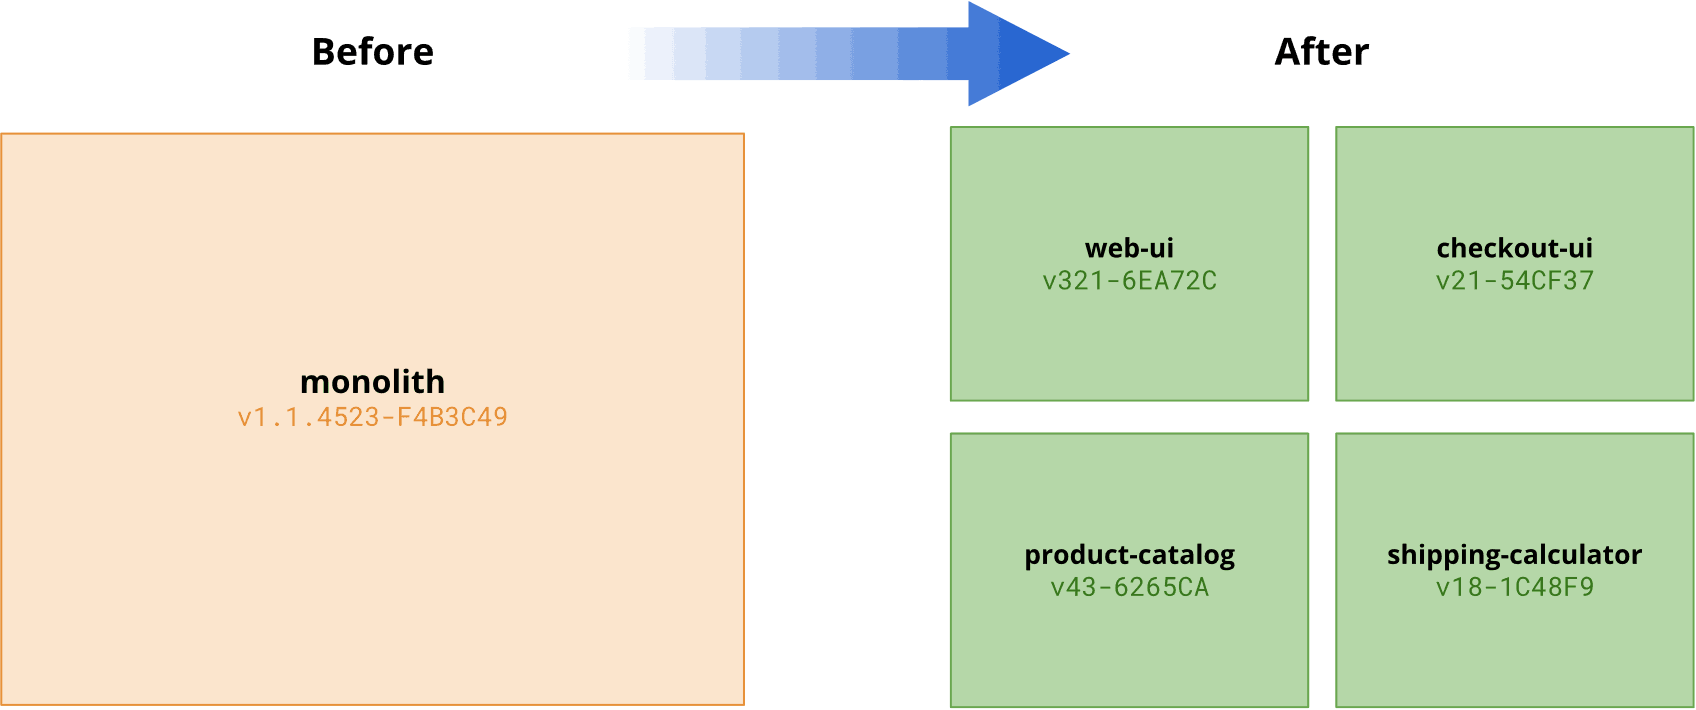 Diagram showing a monolith with a single version number versus multiple microservices with many version numbers